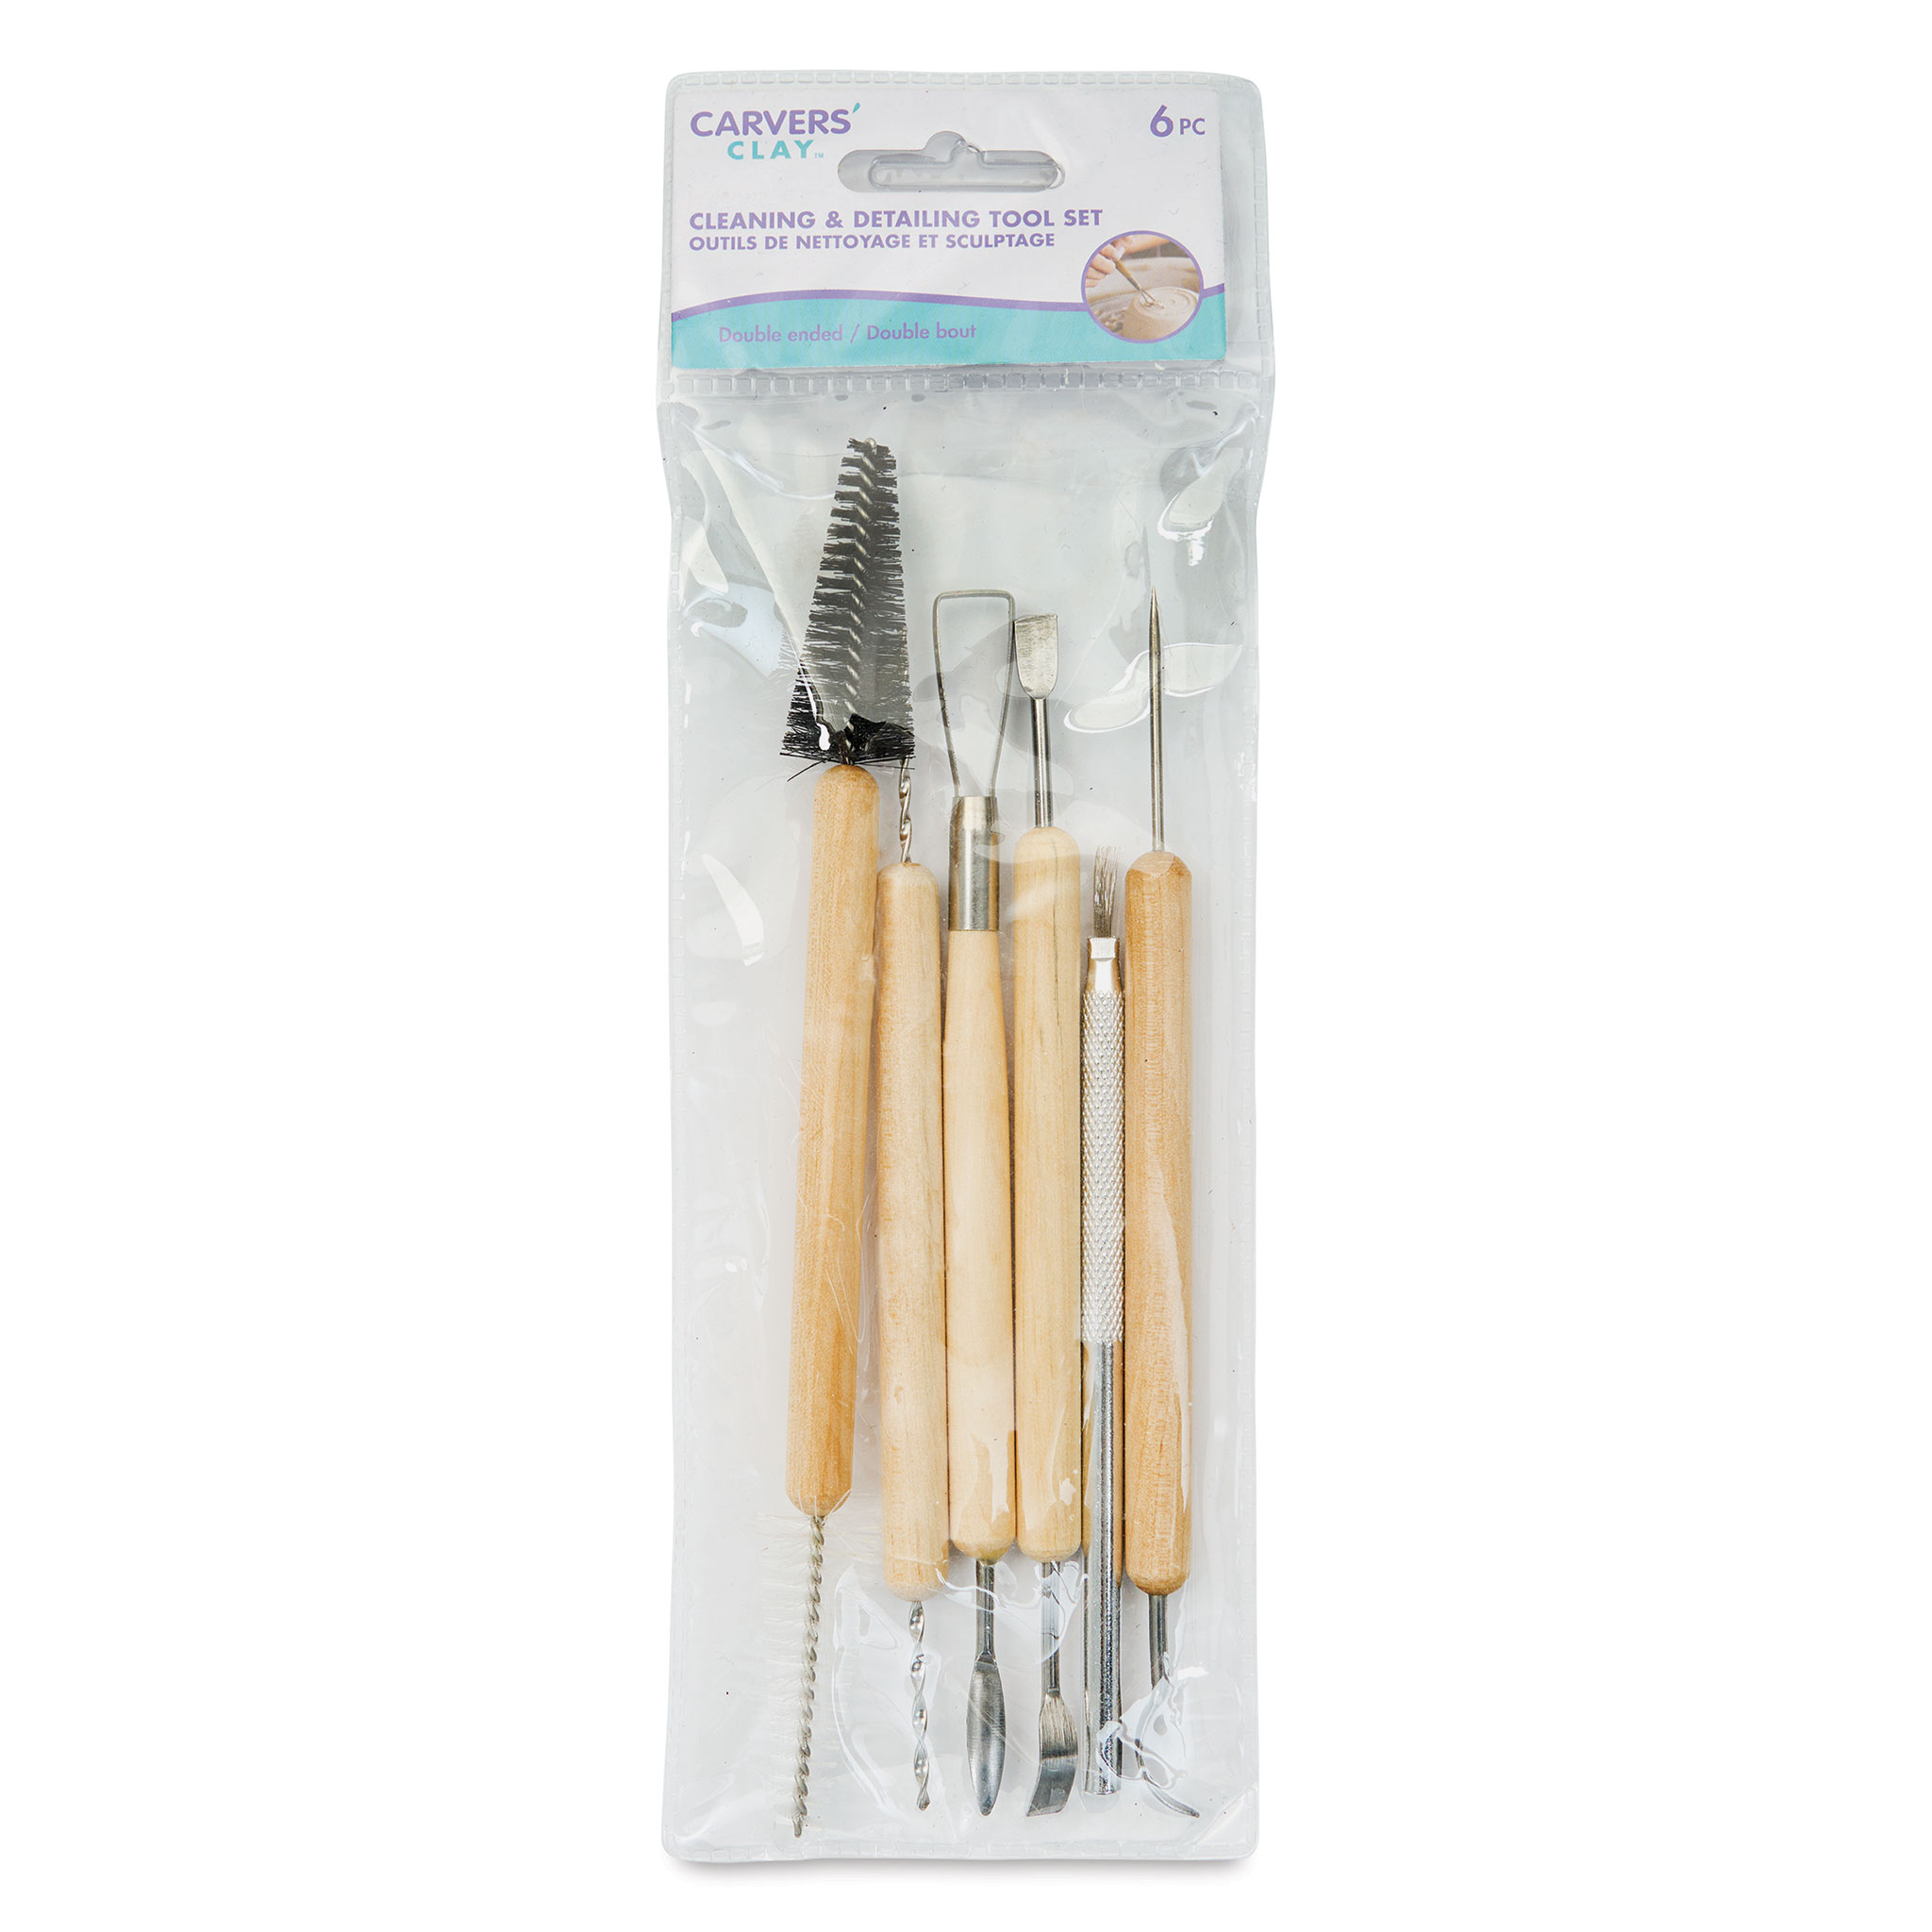 Carvers' Clay Cleaning and Detailing Tools - Set of 6